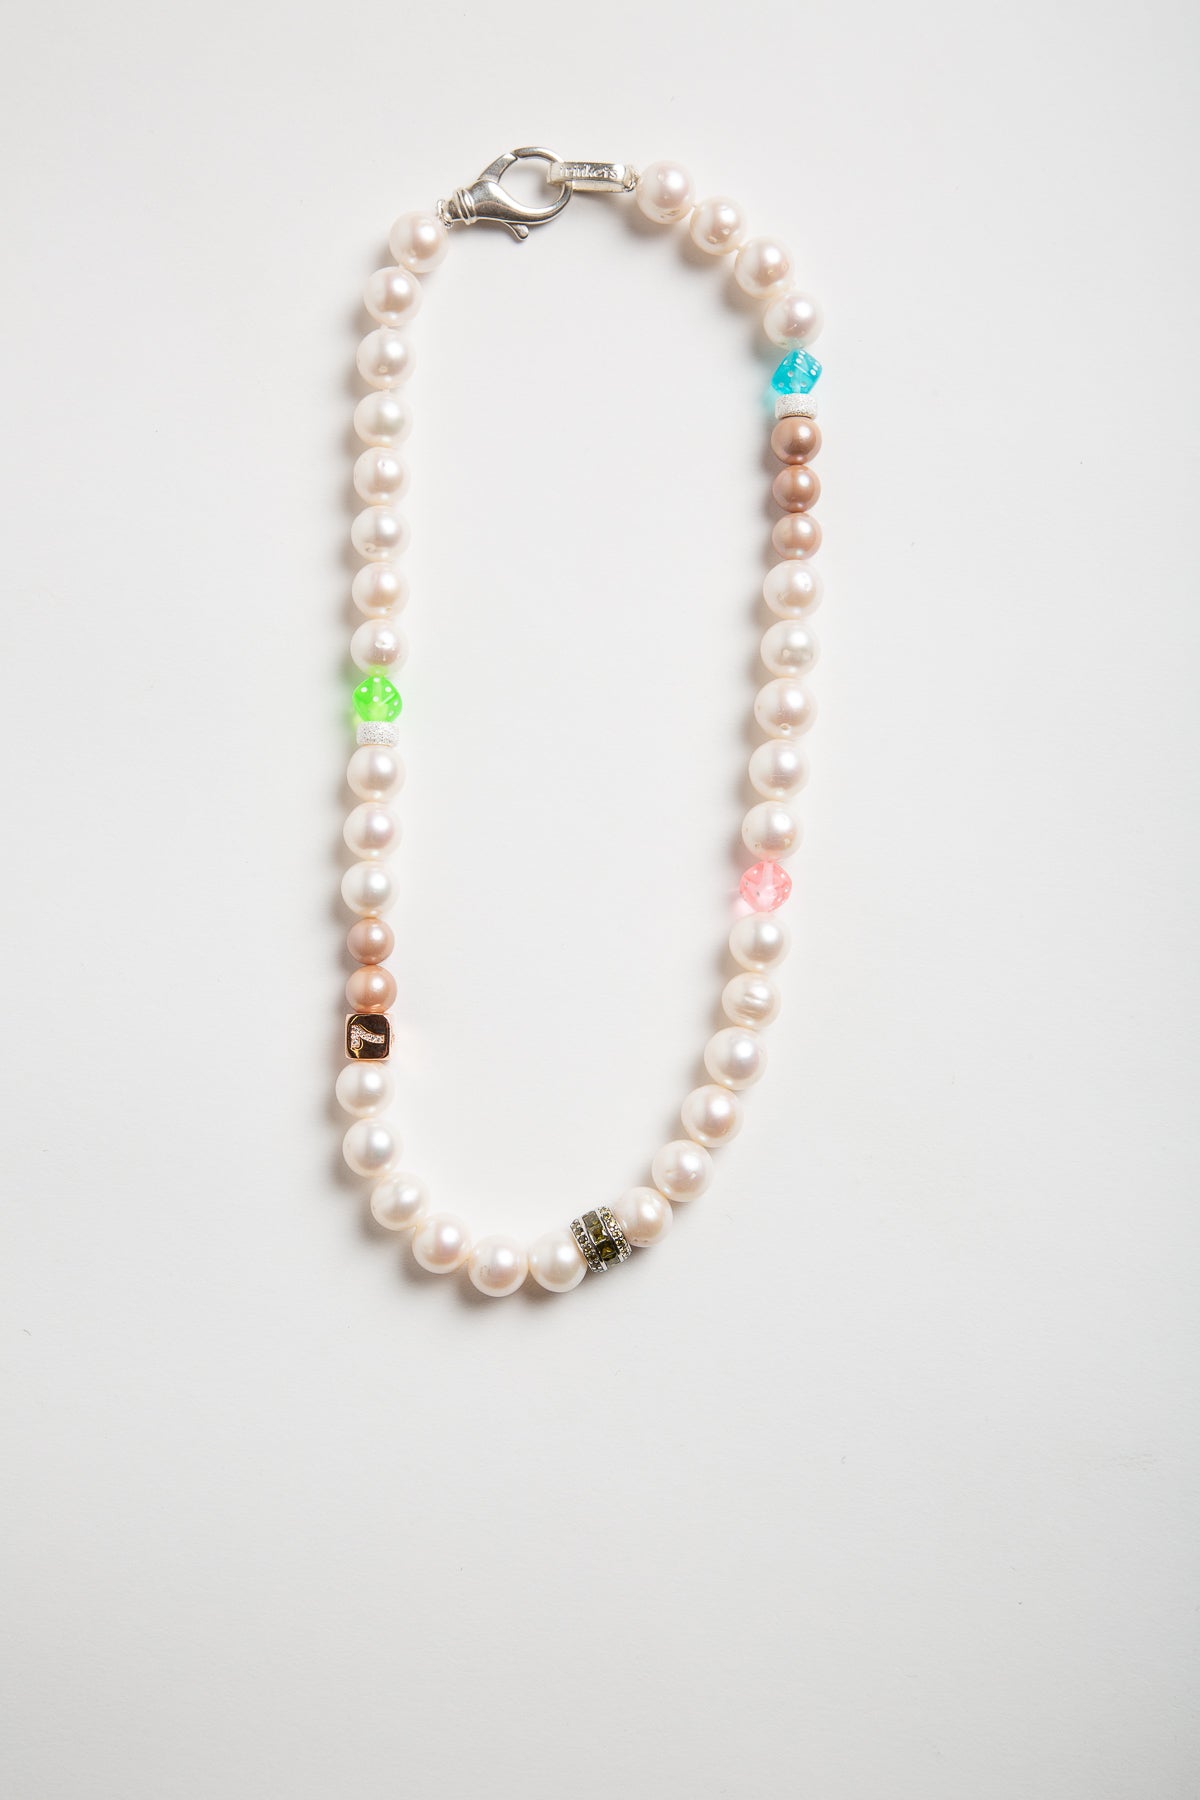 TRIN-KET | MIXED PEARL CHOKER NECKLACE